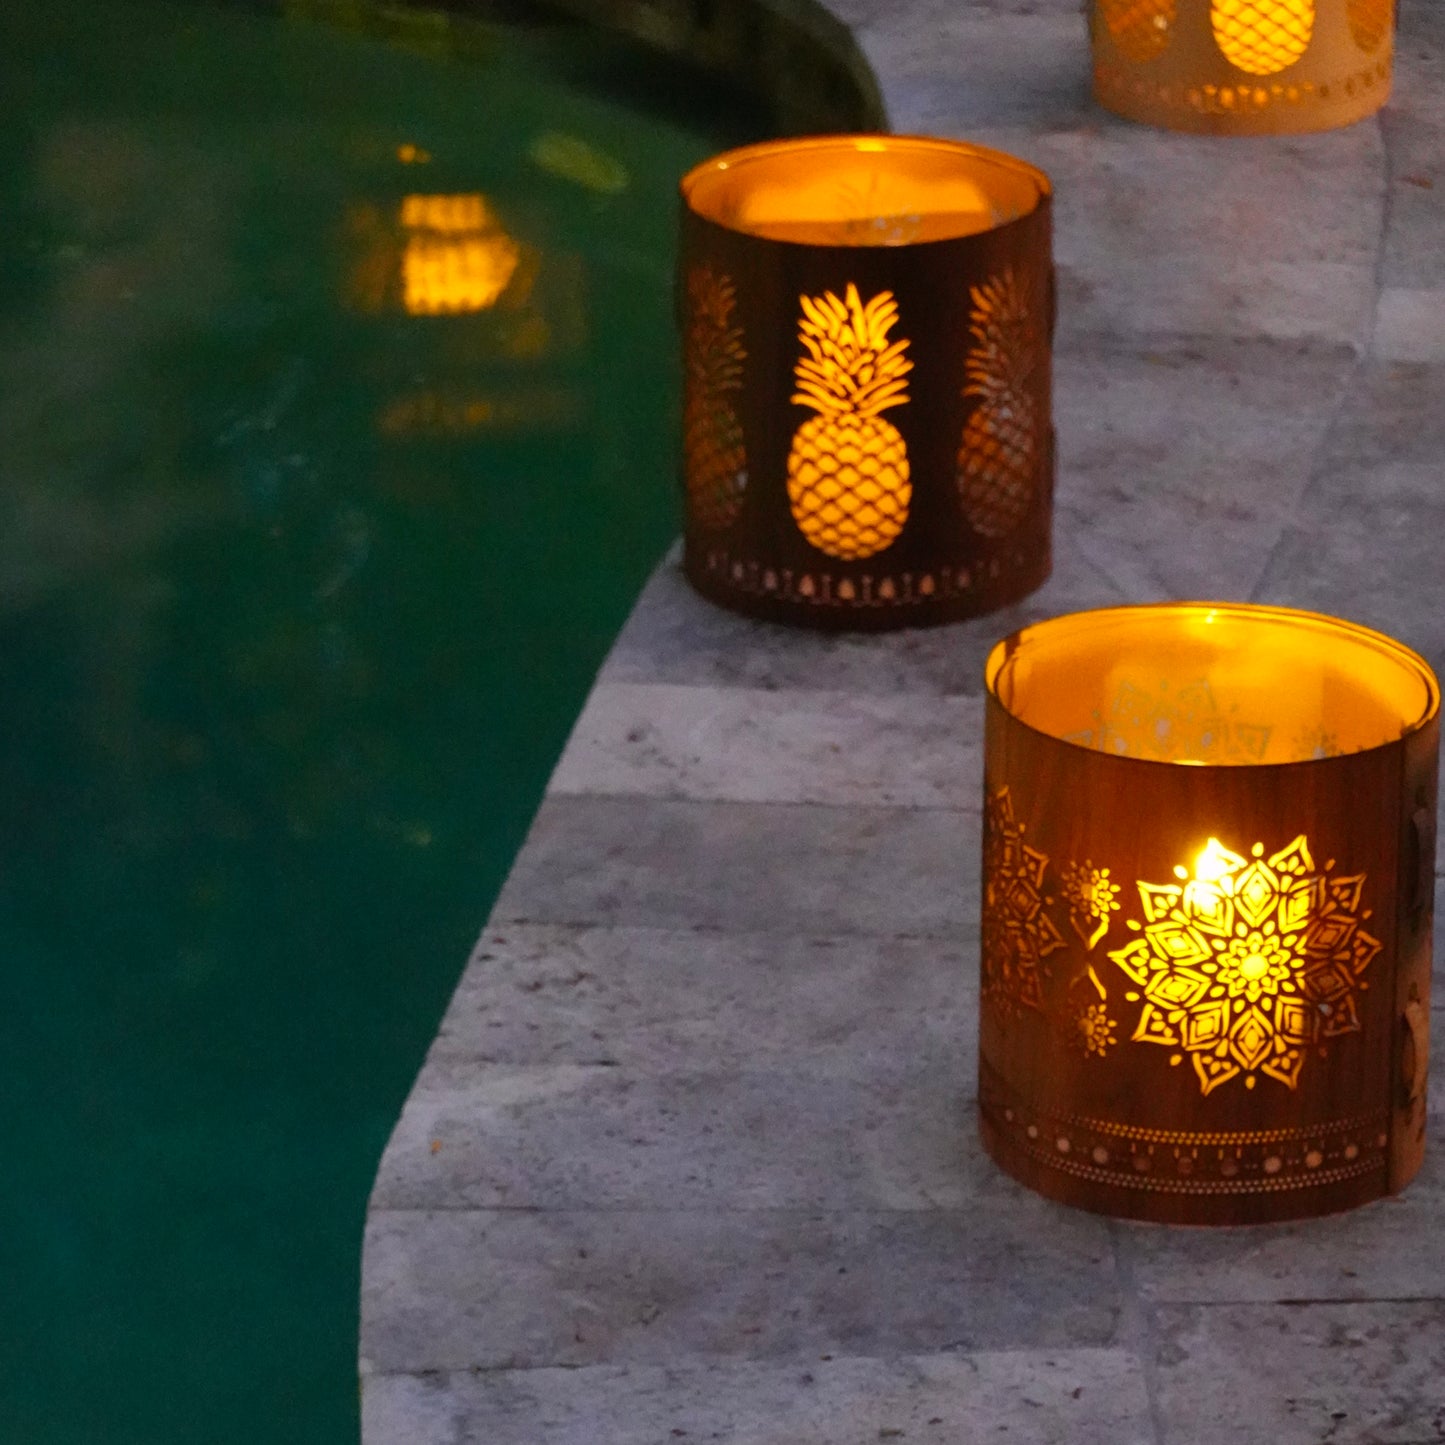 The pineapple lantern - a welcoming tradition in glass and wood-maple,oak,or walnut